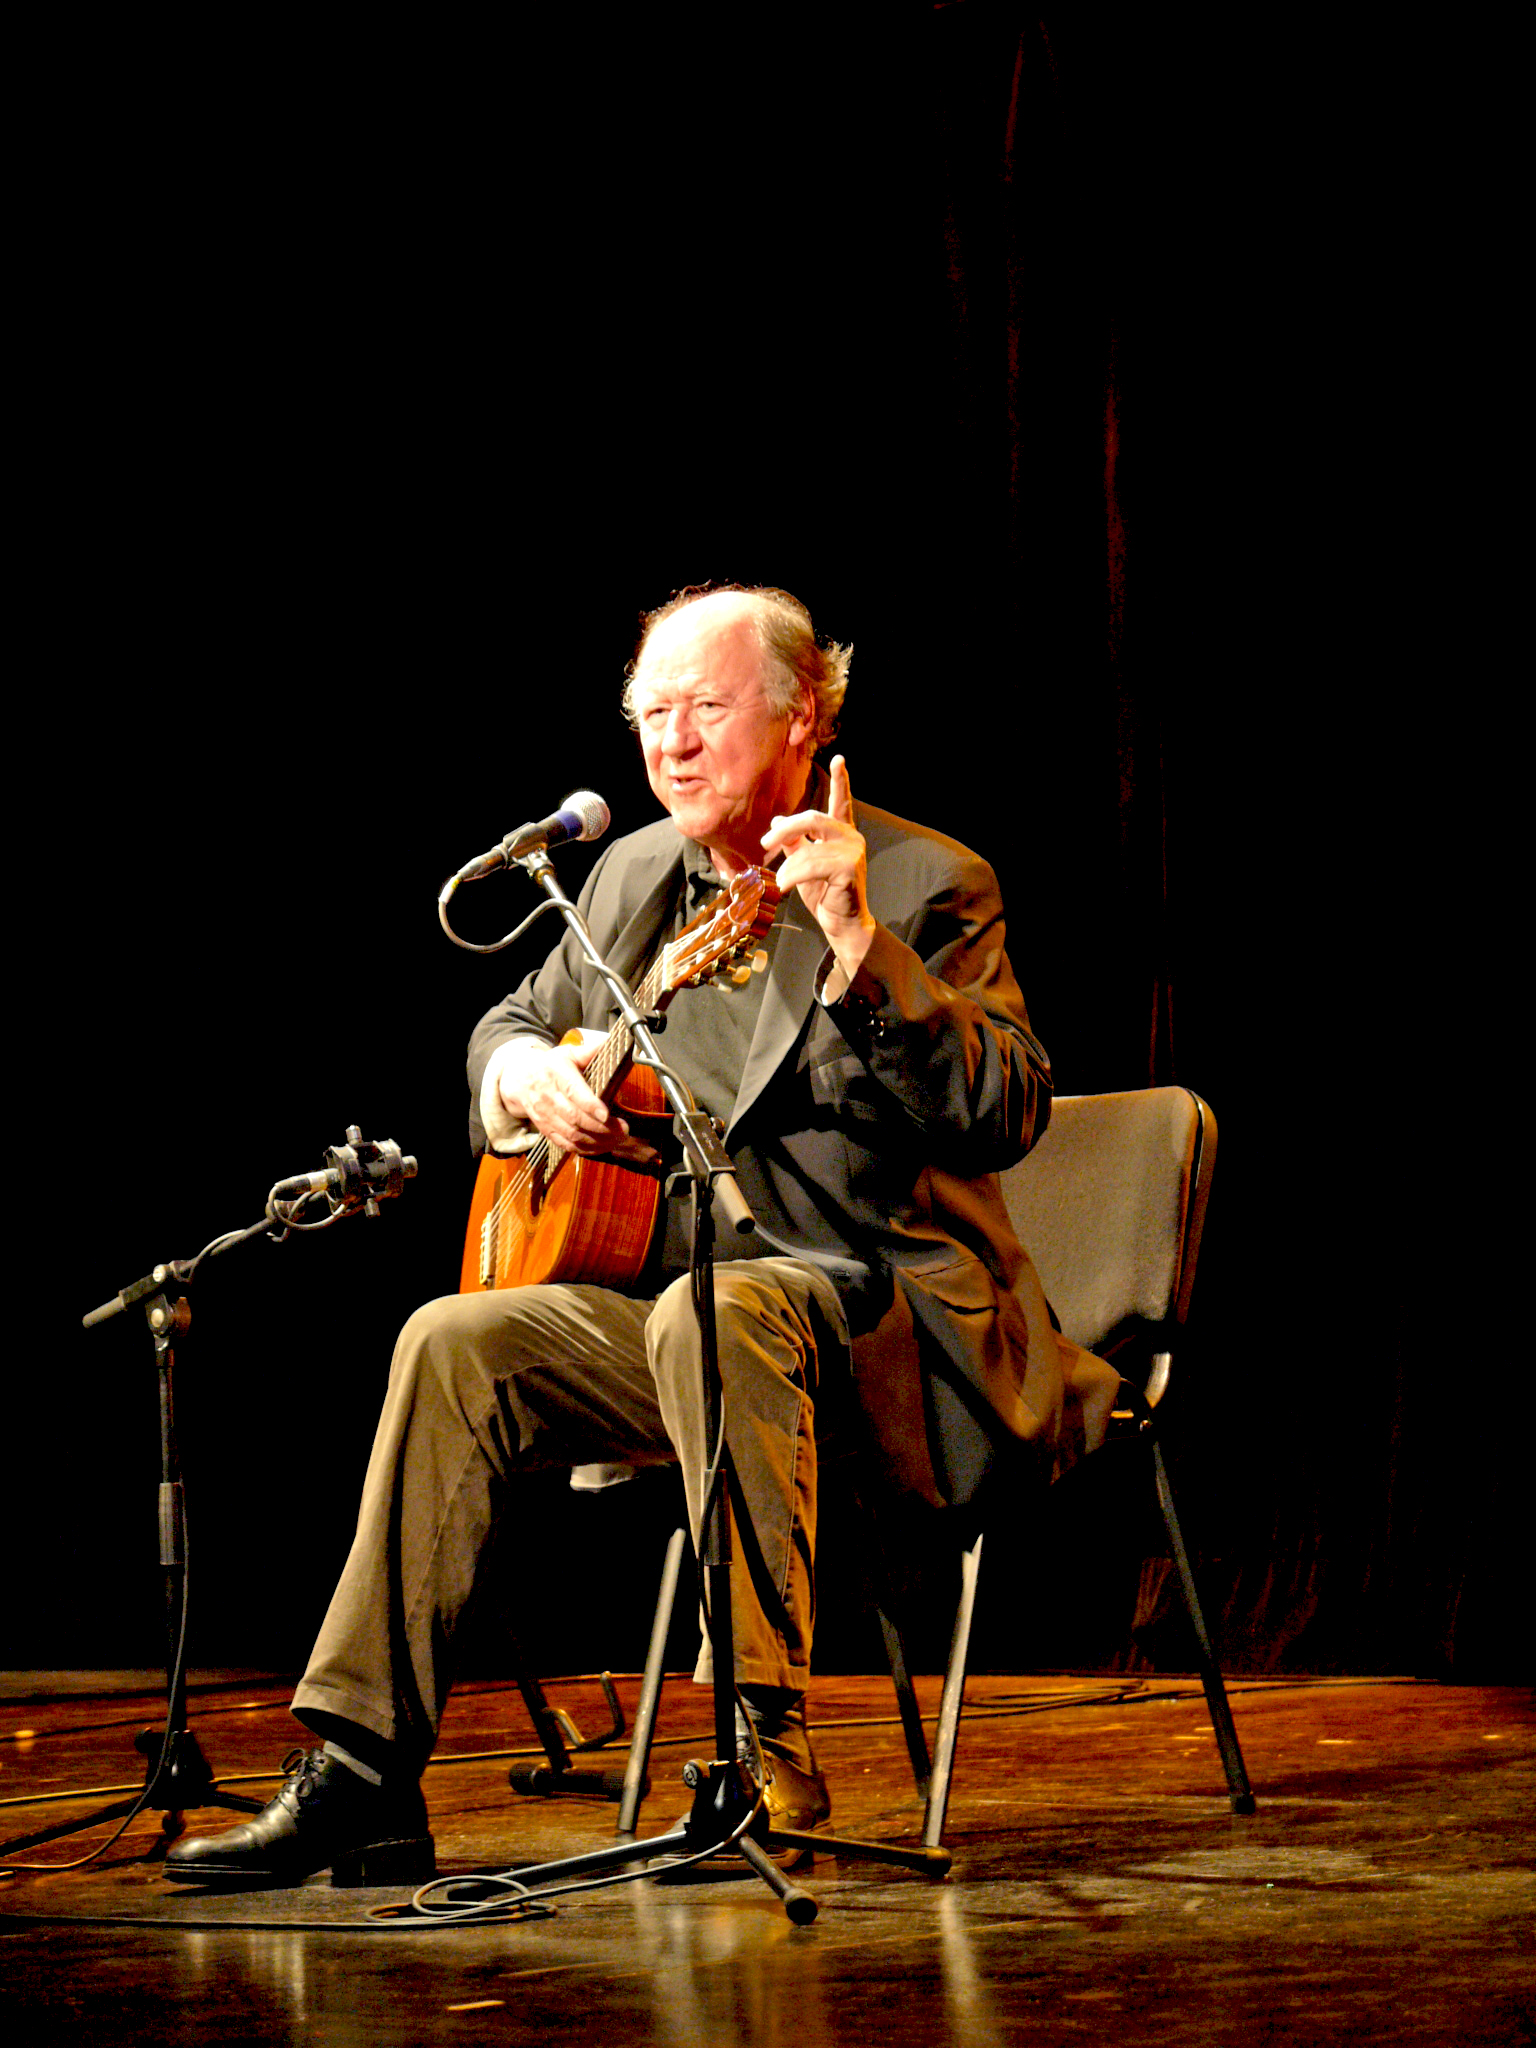 an old man playing on a guitar in front of microphones